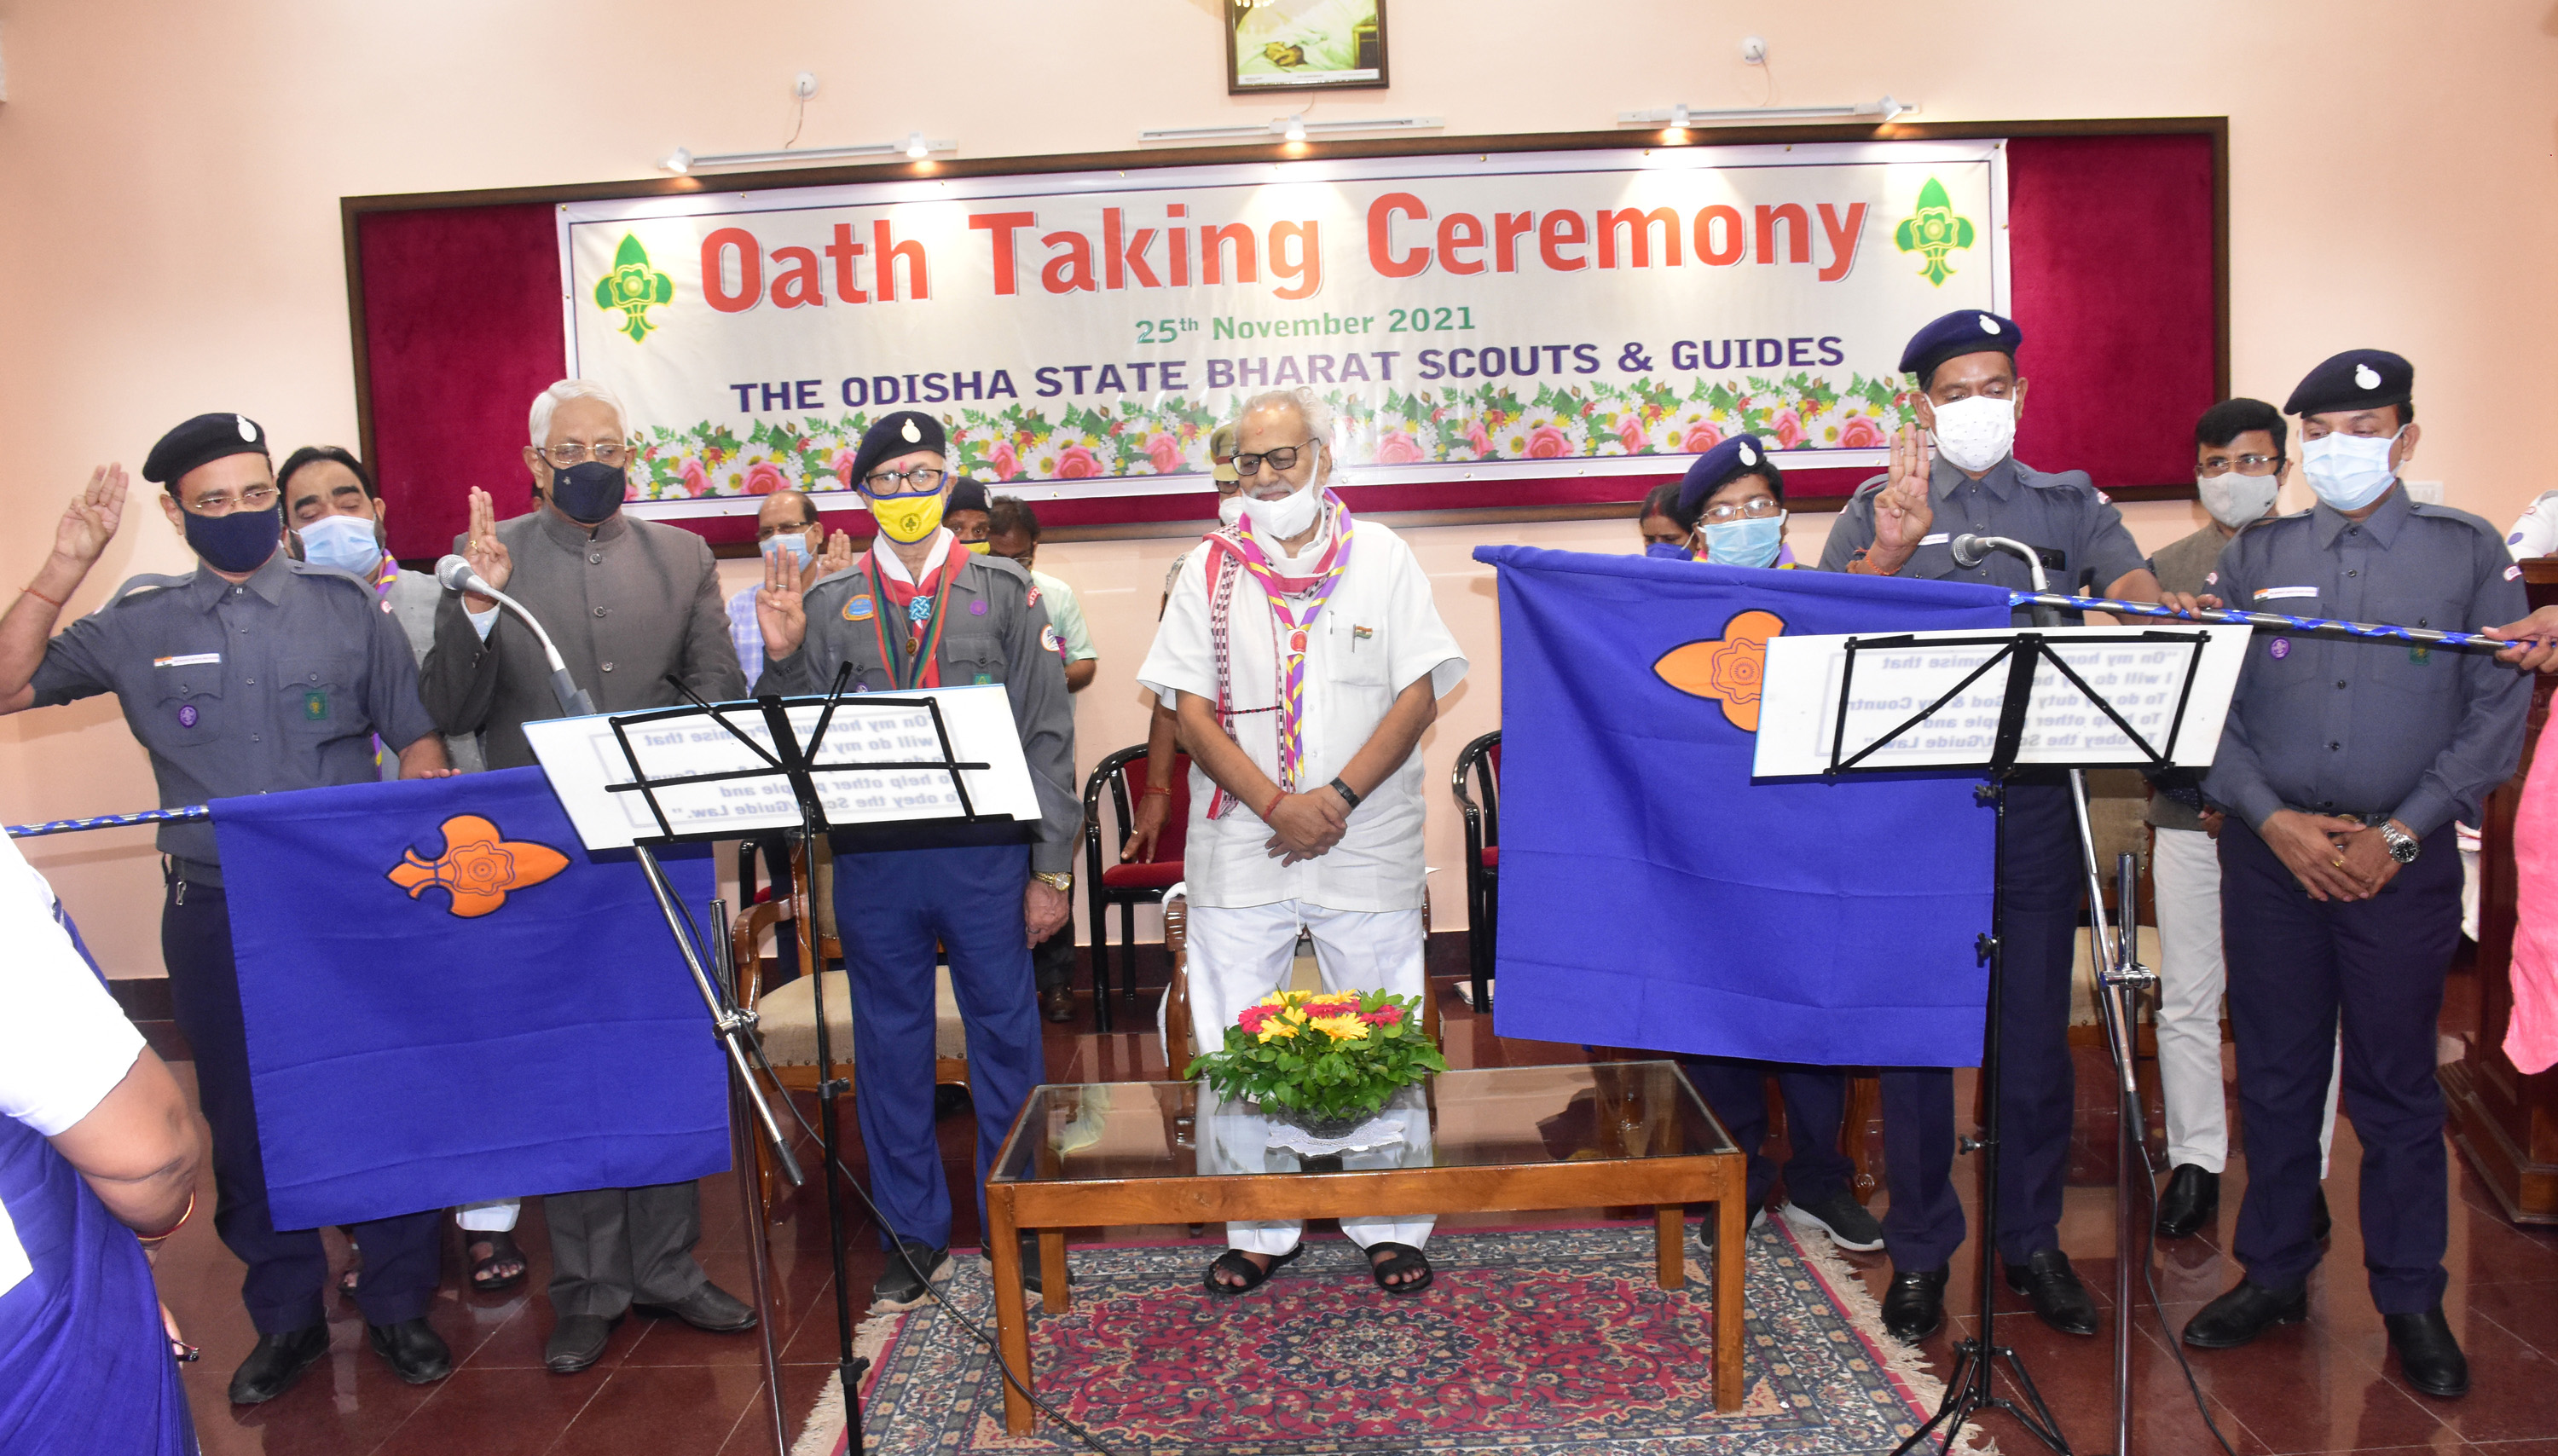 Hon'ble Governor Prof Ganeshi Lal administering oath to office bearers in oath taking ceremony of Odisha State Bharat Scouts and Guides at Rajbhawan on 25.11.2021.